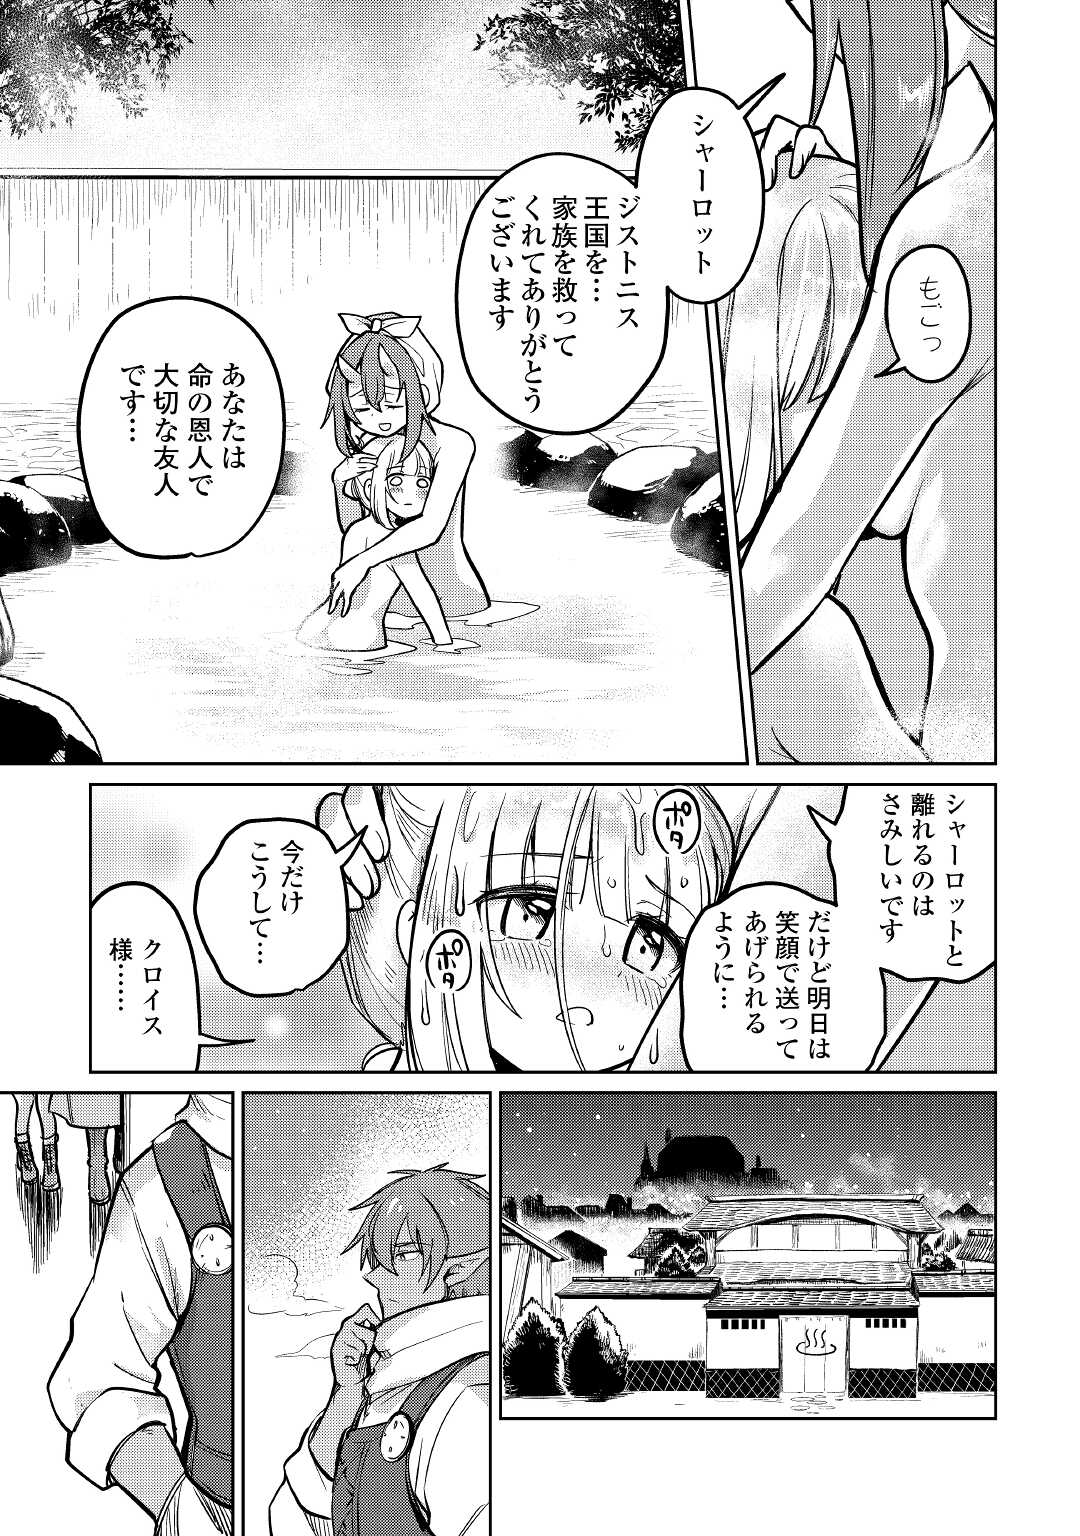 The Former Structural Researcher’s Story of Otherworldly Adventure 第41話 - Page 13